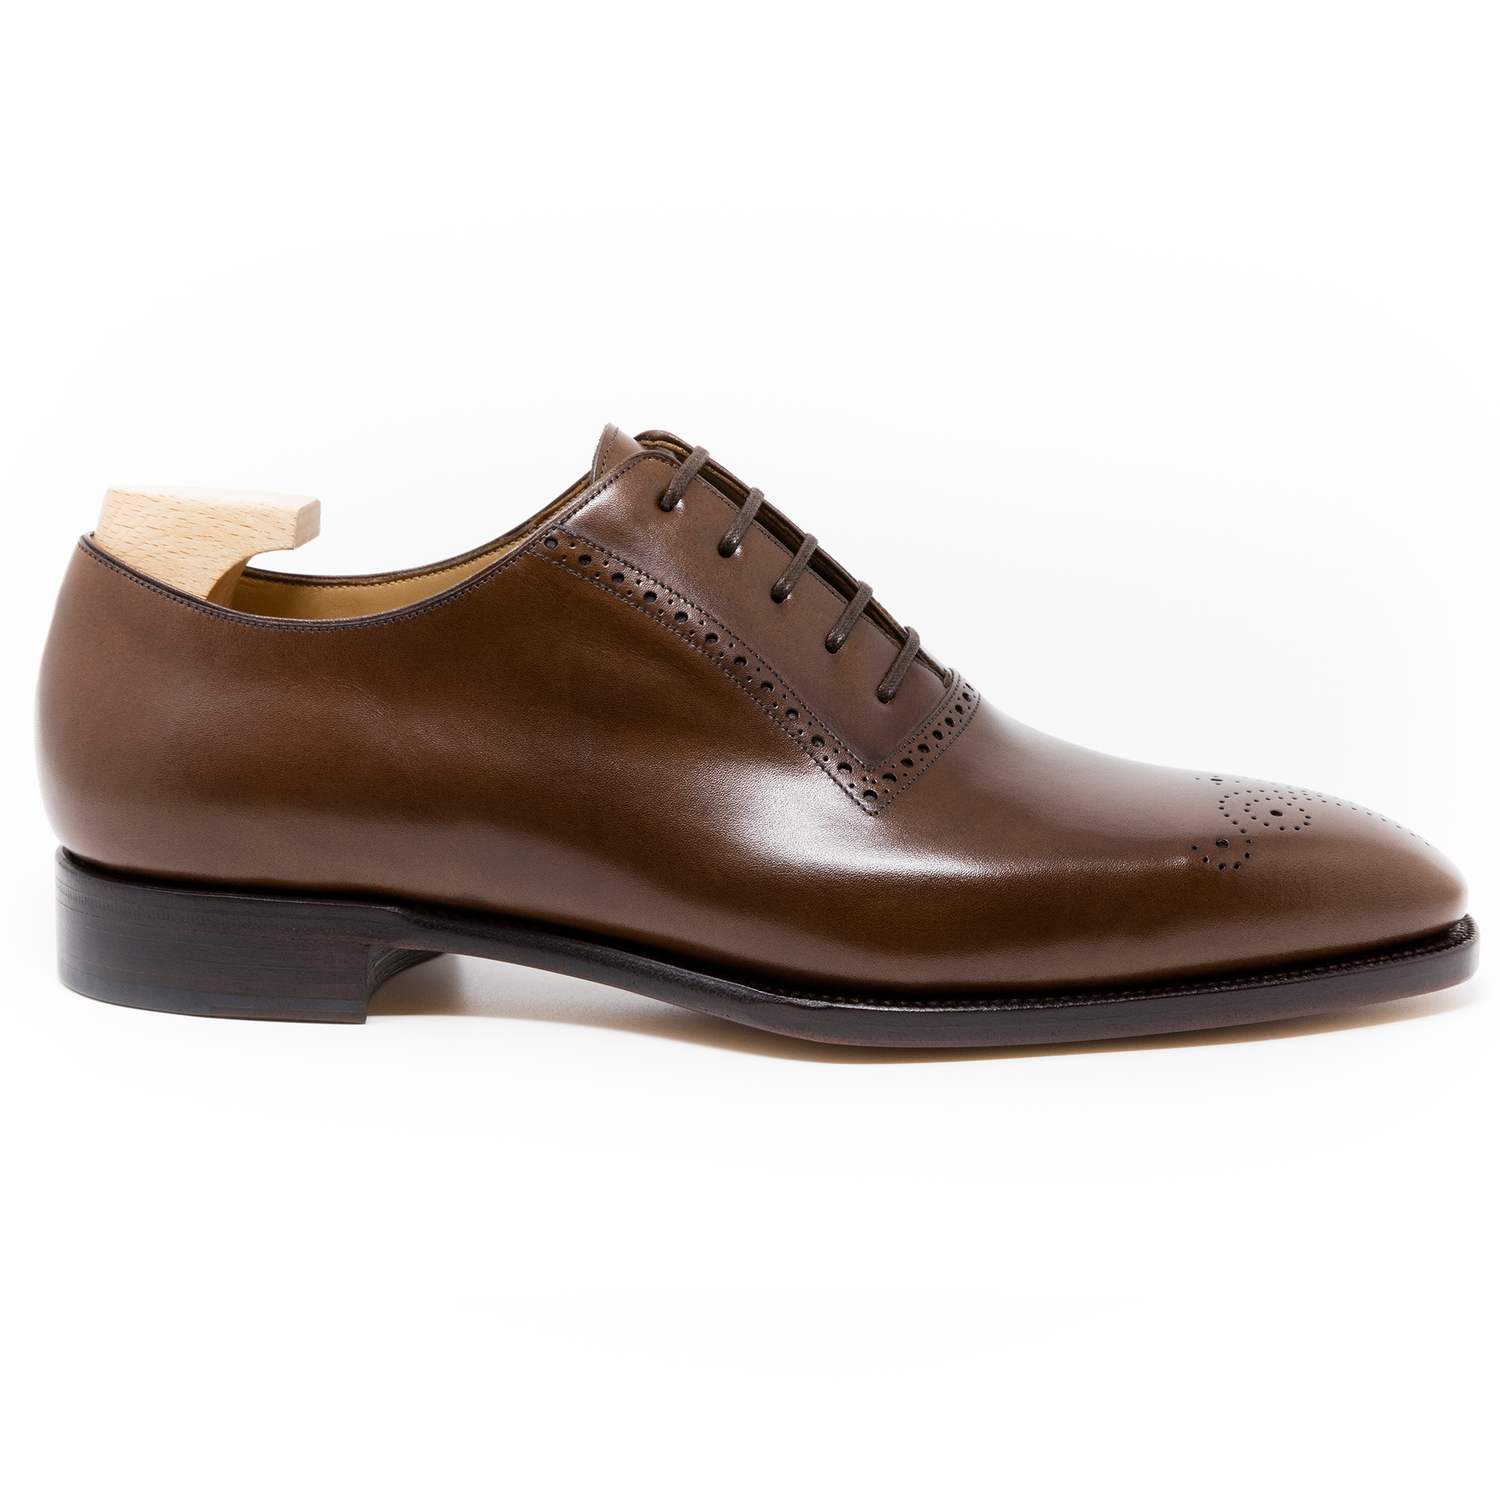 TLB Mallorca leather shoes 107 / PICASSO /VEGANO BROWN